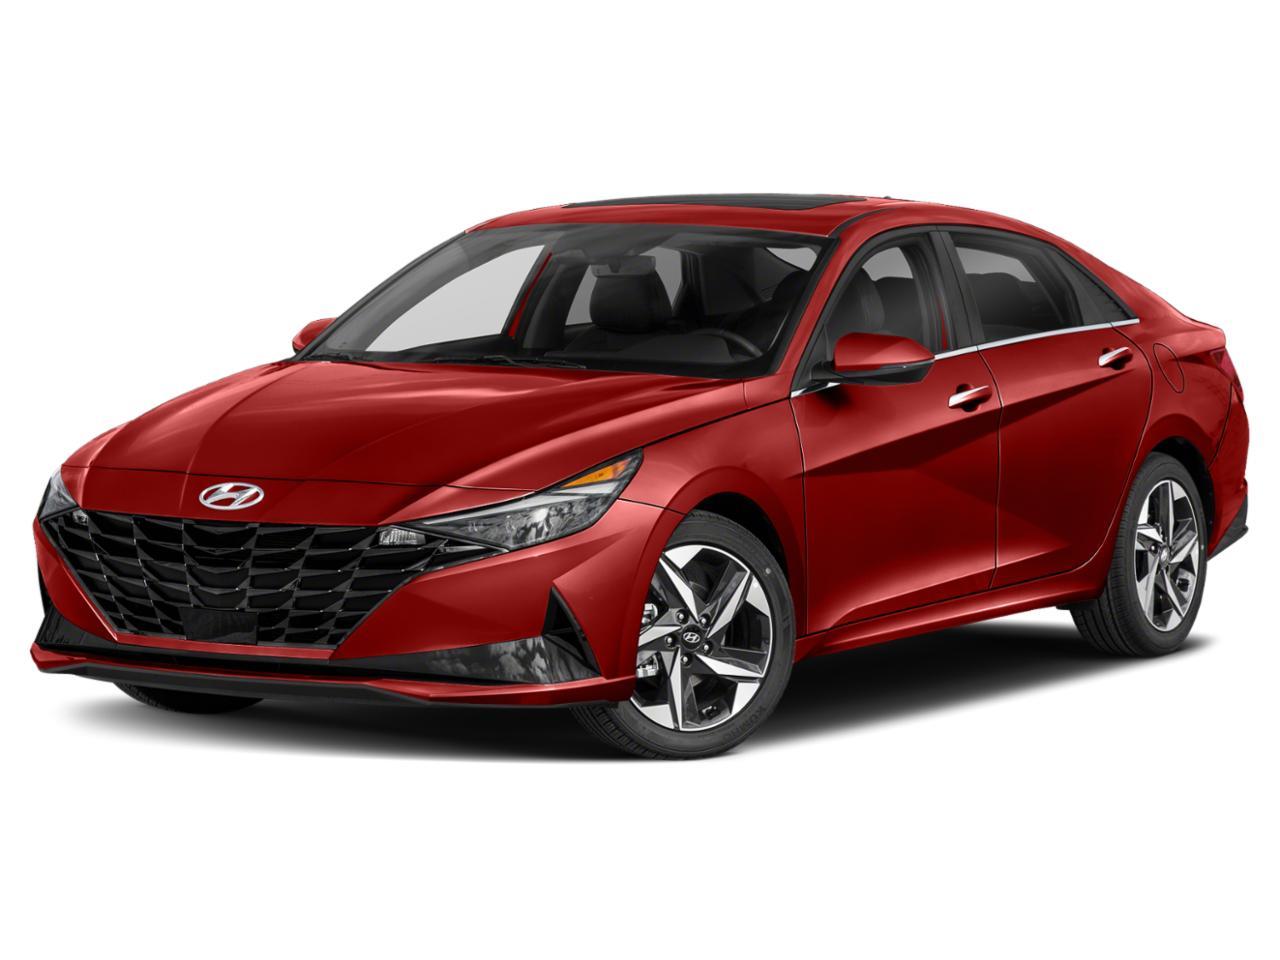 2023 Hyundai ELANTRA in Limited IVT and Red for Sale in Merrillville